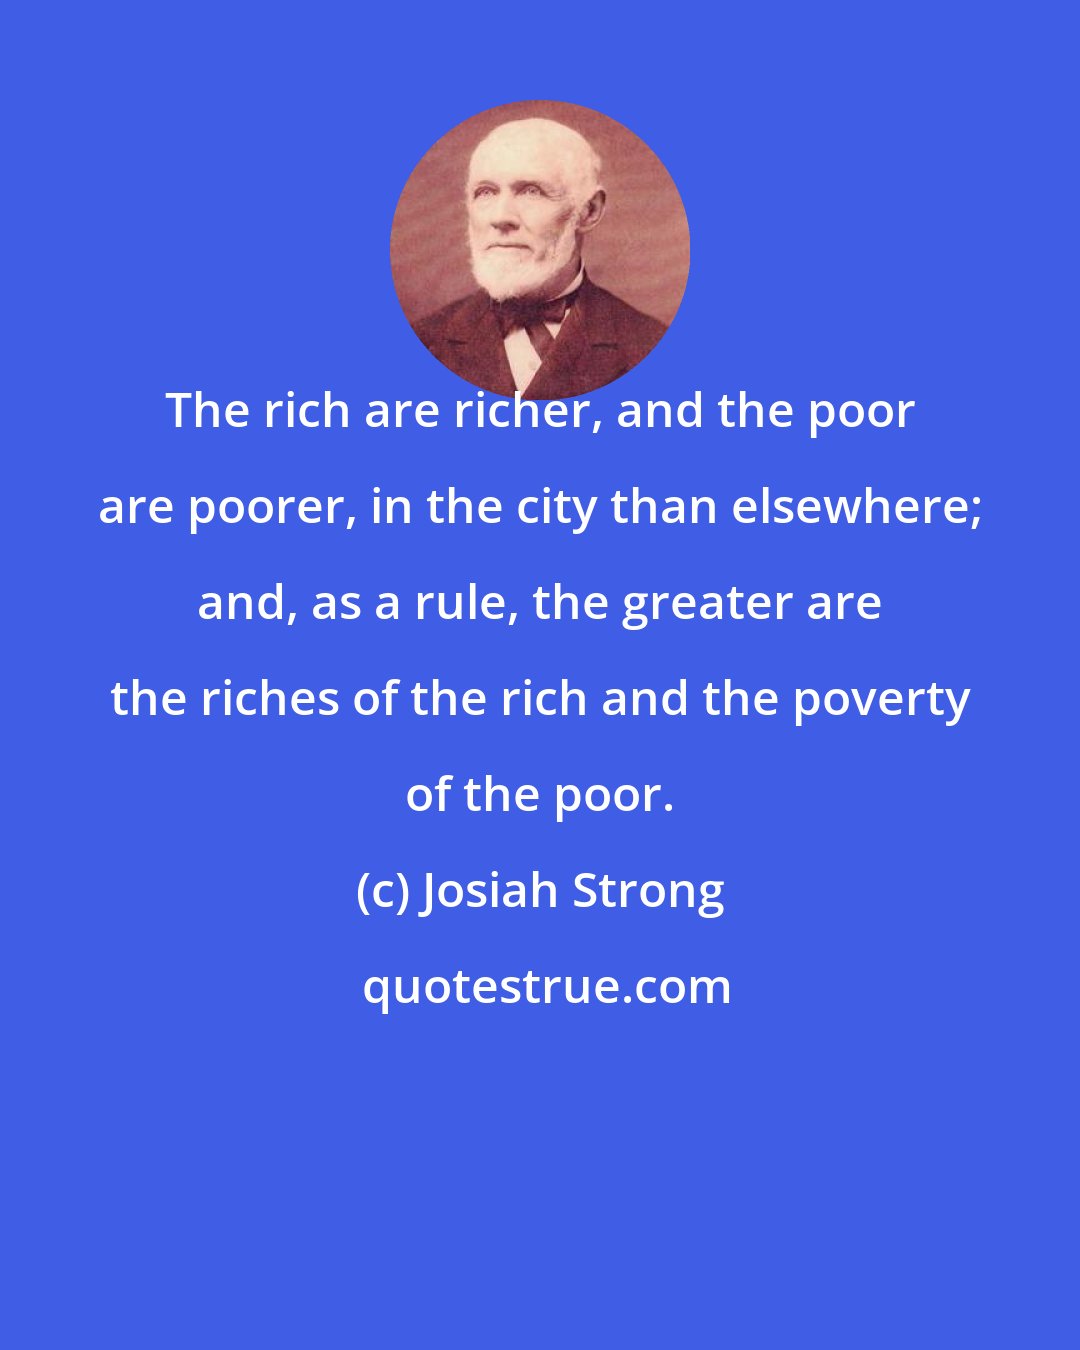 Josiah Strong: The rich are richer, and the poor are poorer, in the city than elsewhere; and, as a rule, the greater are the riches of the rich and the poverty of the poor.